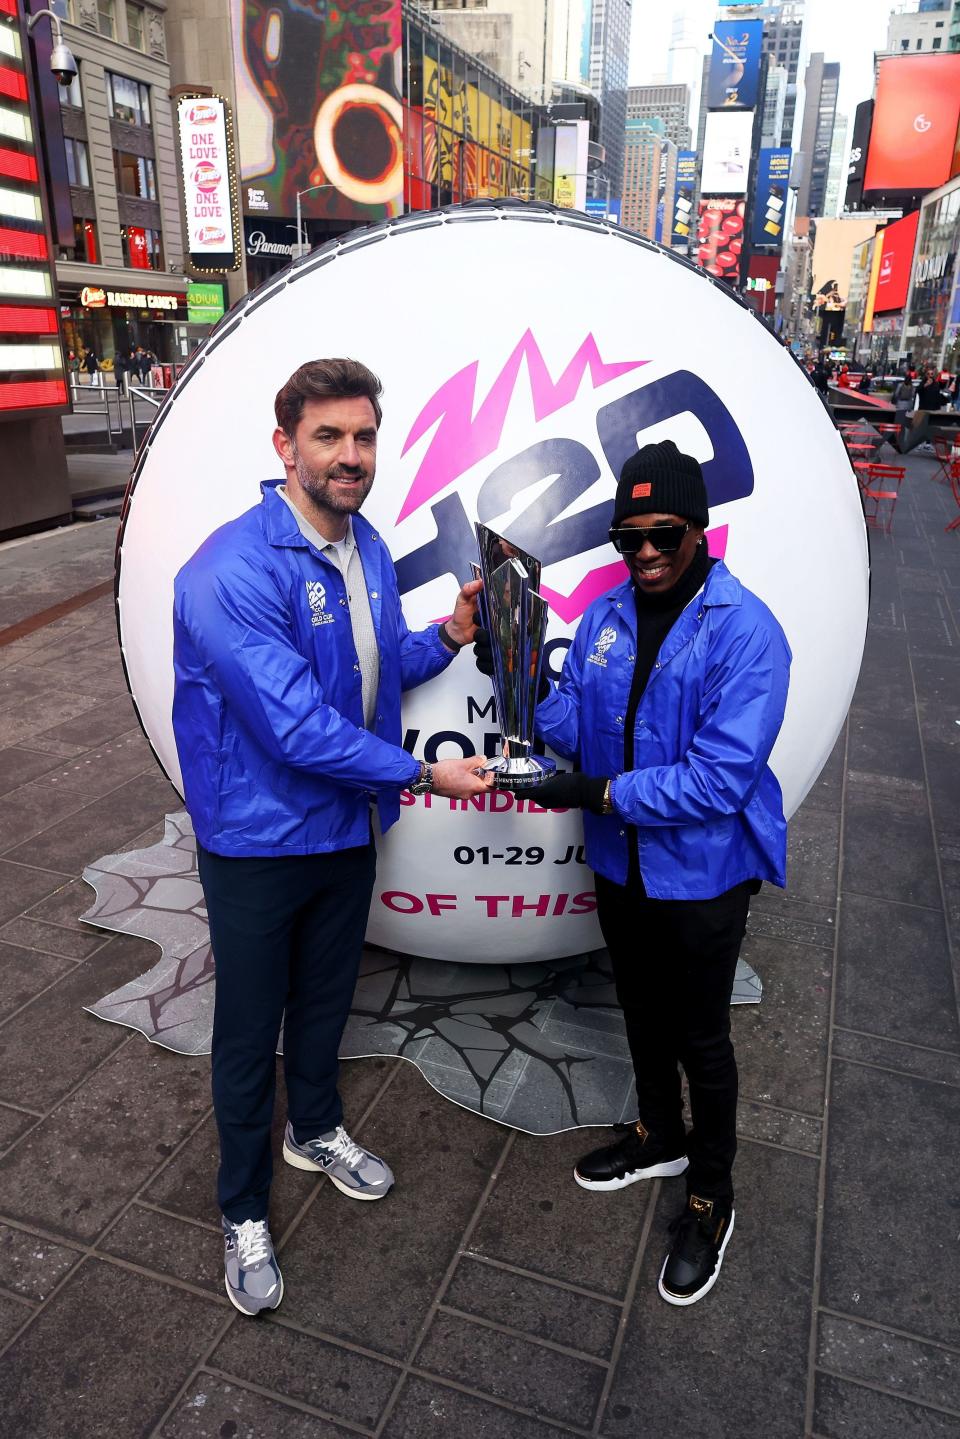 England's Liam Plunkett and former captain of the West Indies cricket team Dwayne Bravo at the '100 days to go' celebrations for the ICC Men’s T20 World Cup event in New York City on Feb. 22, 2024.